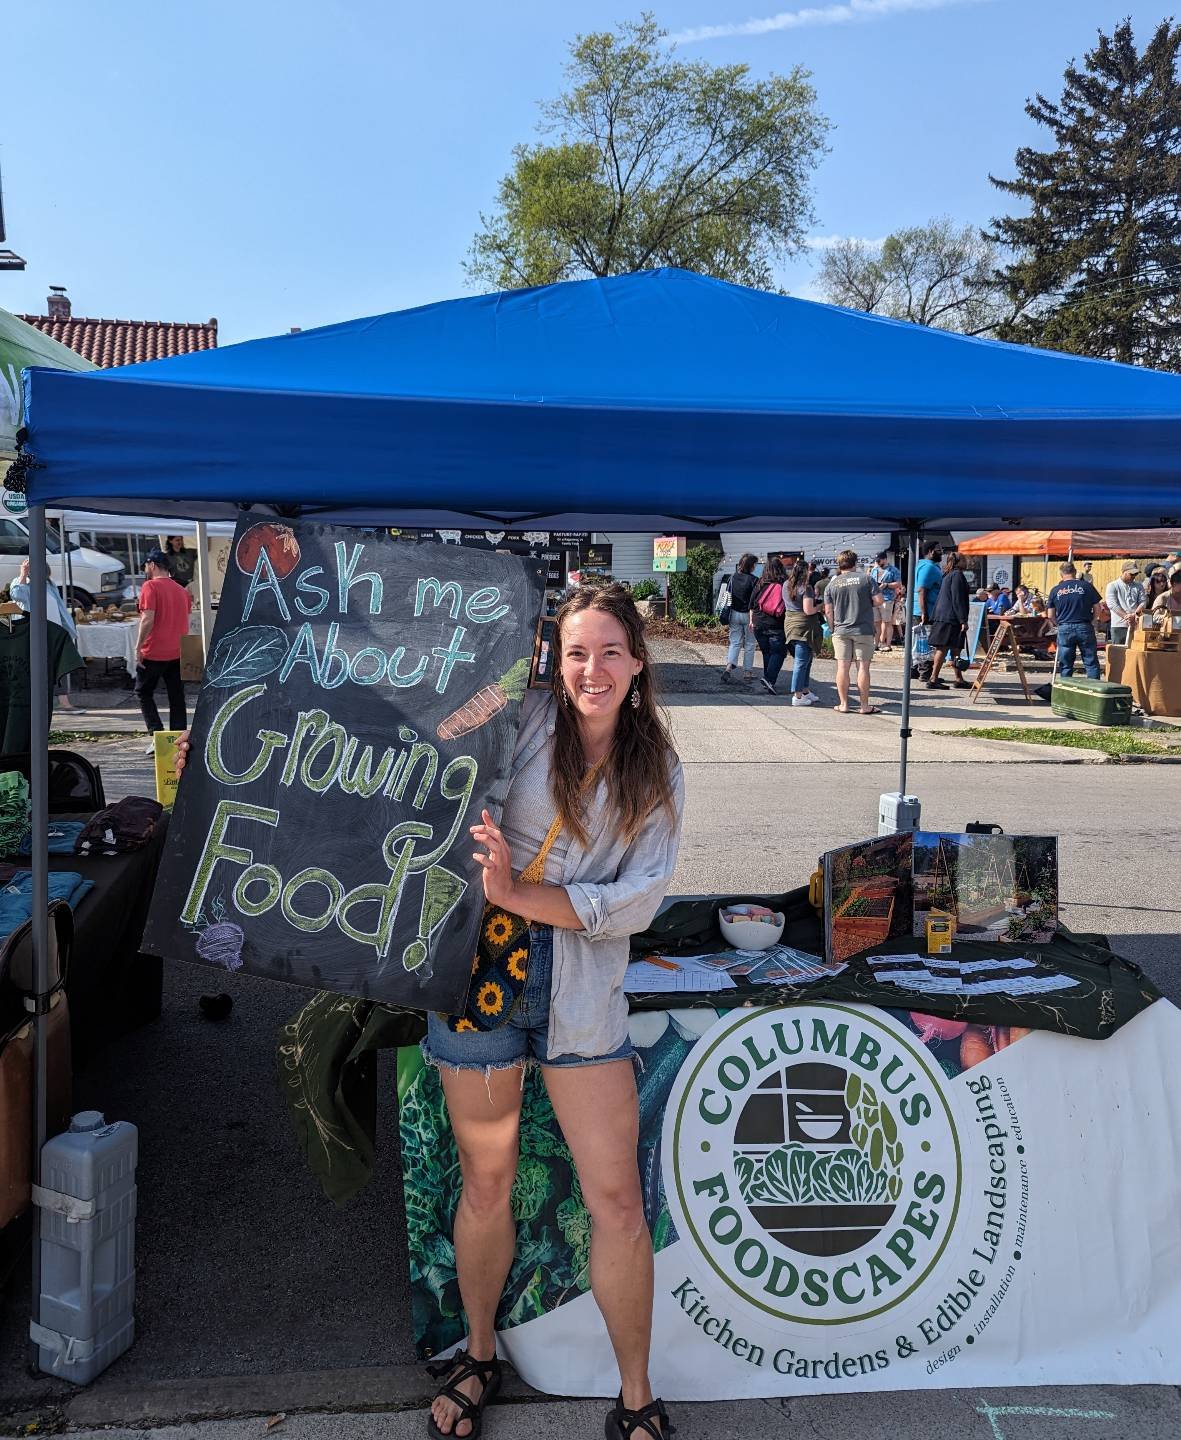 Answering gardening questions this morning @commongreens_clintonville! Clintonville, y'all rock and are doing the good work 🥦🌱 thanks for having us 🦋

#FarmersMarket #ClintonvilleFarmersMarket #growfood